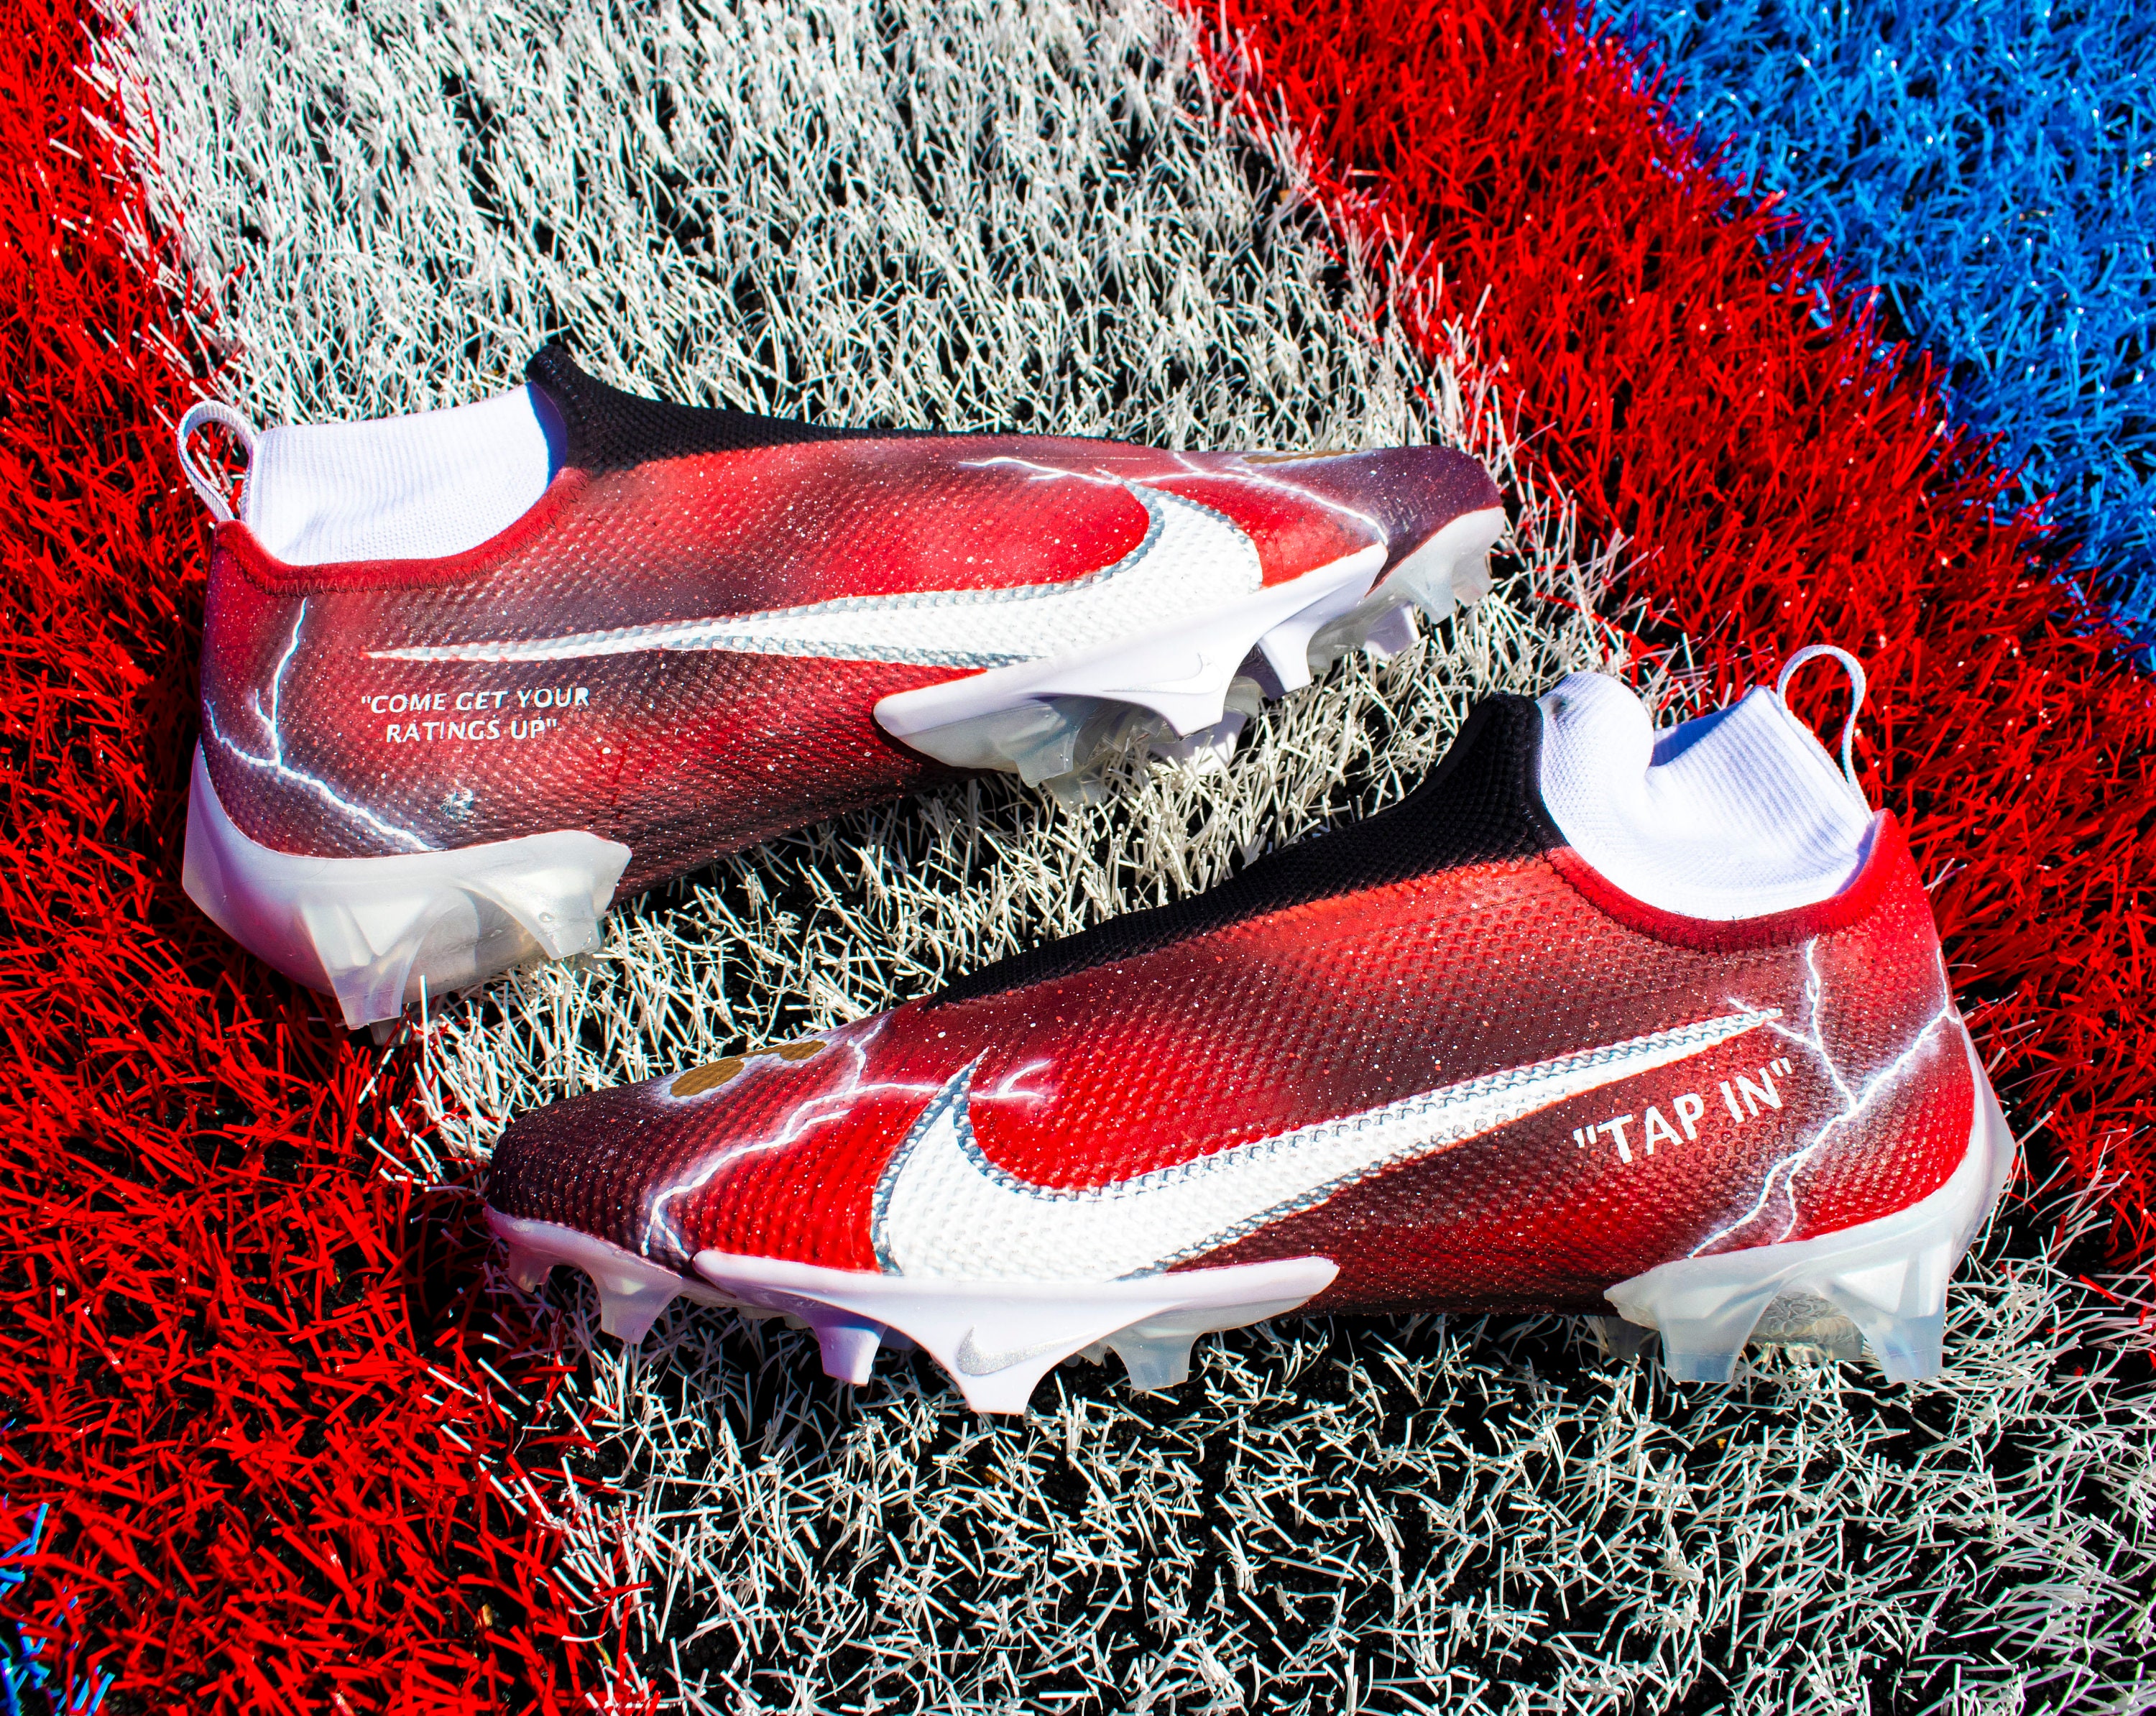 Custom Red LV cleats…🔥🤯 - (What color way should I do next